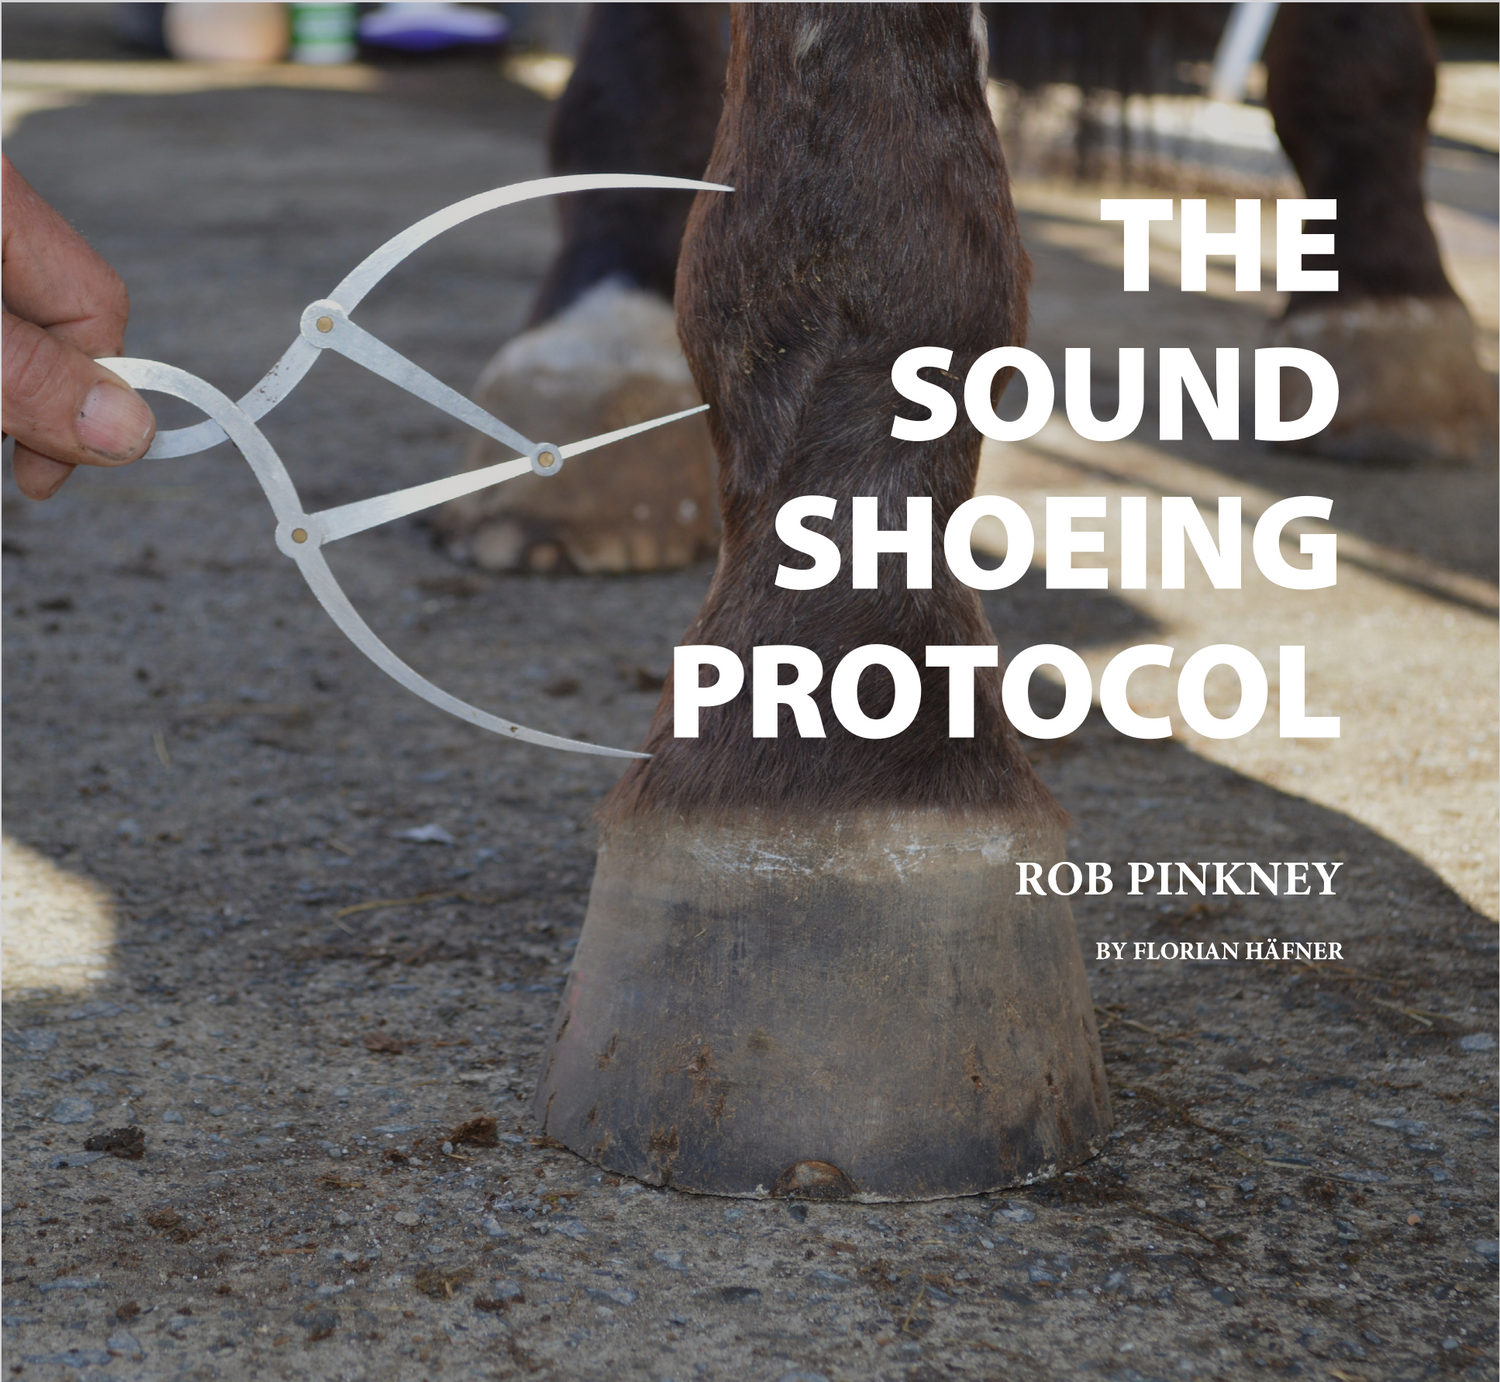 The Sound Shoeing Protocol - Rob Pinkney by Florian Hafner